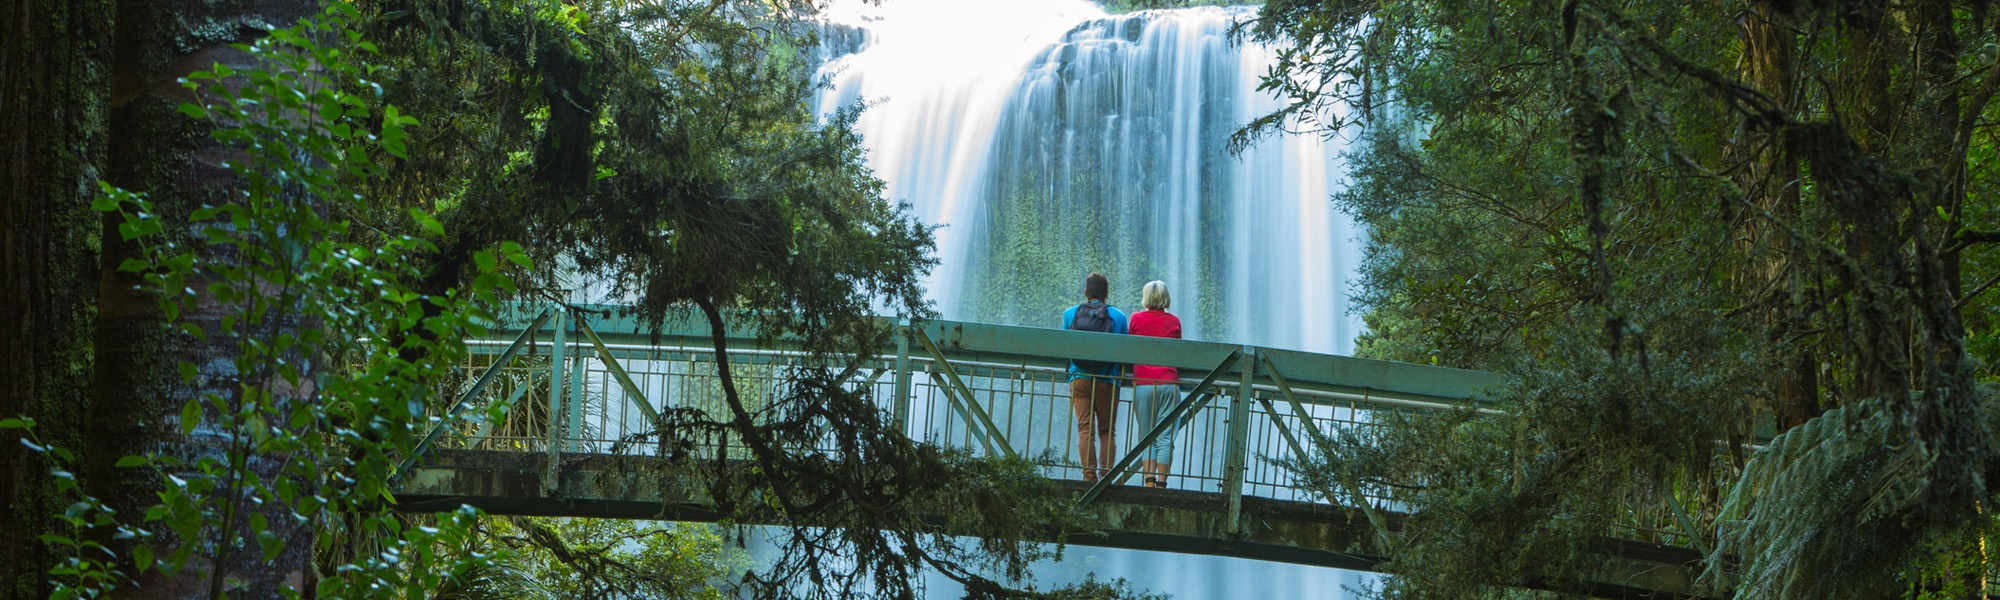 Photo of two people standing on a bridge at the bottom of the Otuihau Whangarei Falls, with trees and the waterfall in the background. 